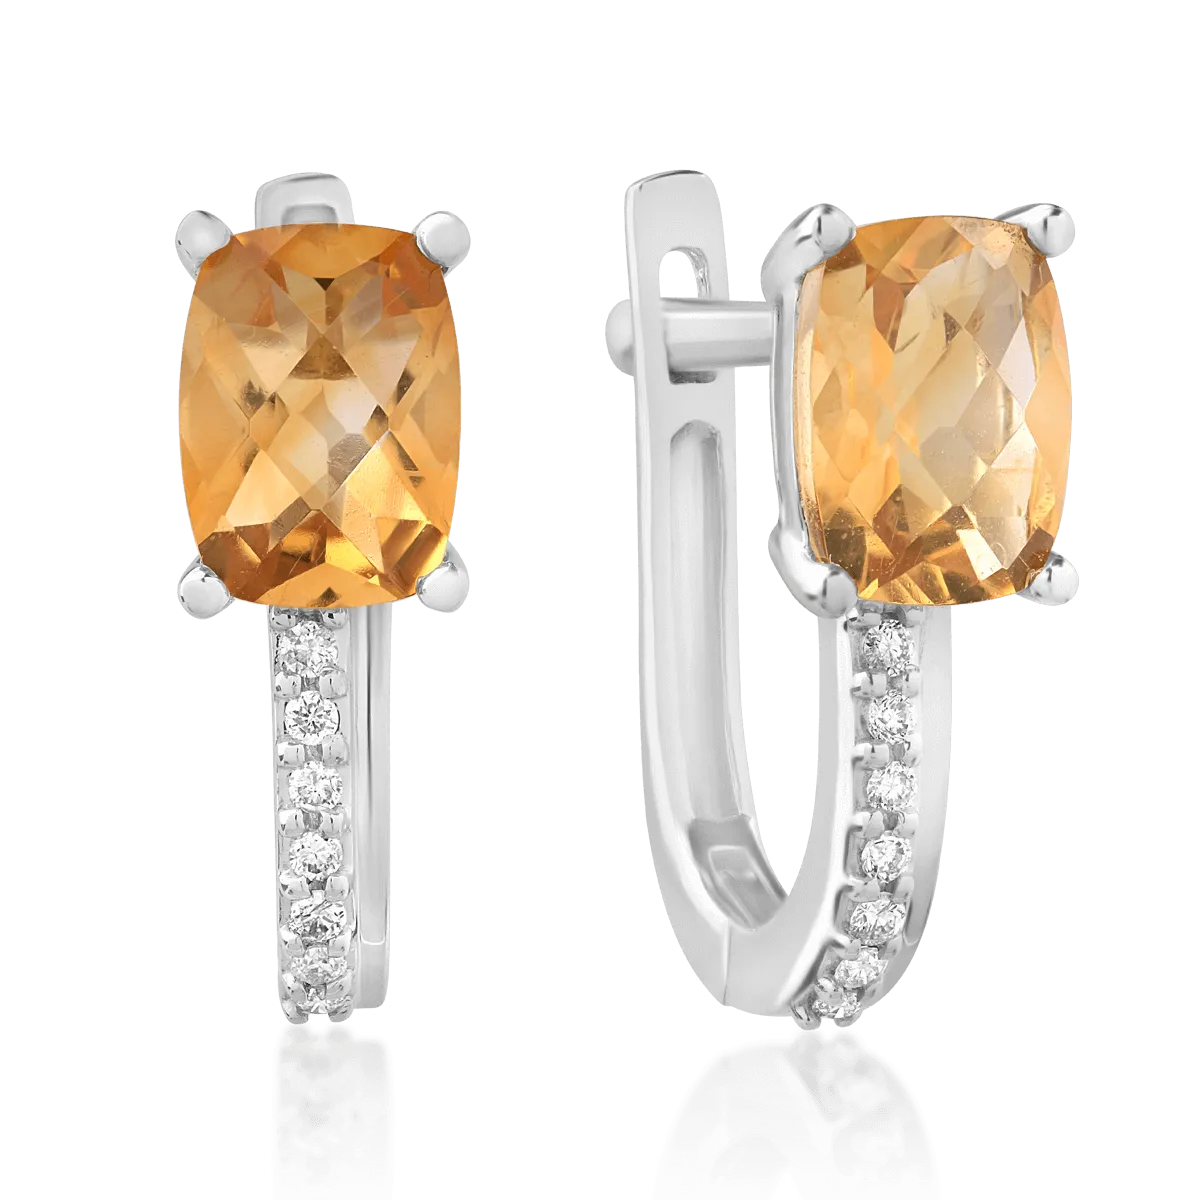 14K white gold earrings with 1.606ct citrines and 0.065ct diamonds